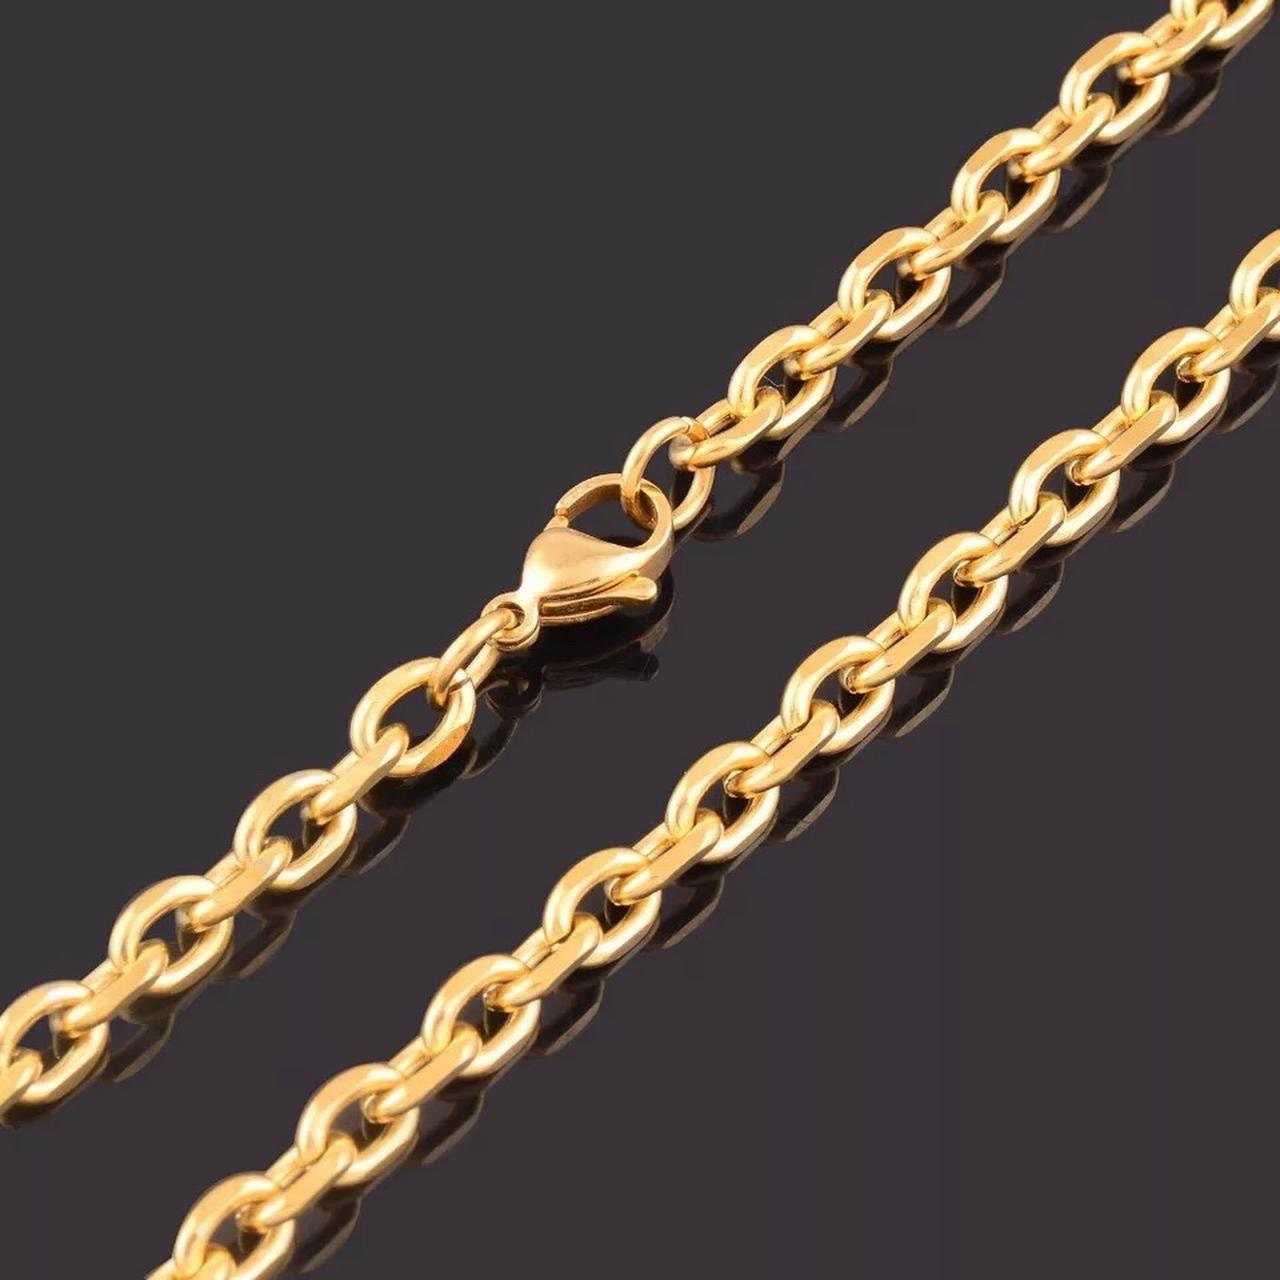 CRW The Great Wave Necklace with 1.6mm rolo link chain in gold - Sea World Necklace for Women -Surf Necklace for Men - Necklace with Pendant